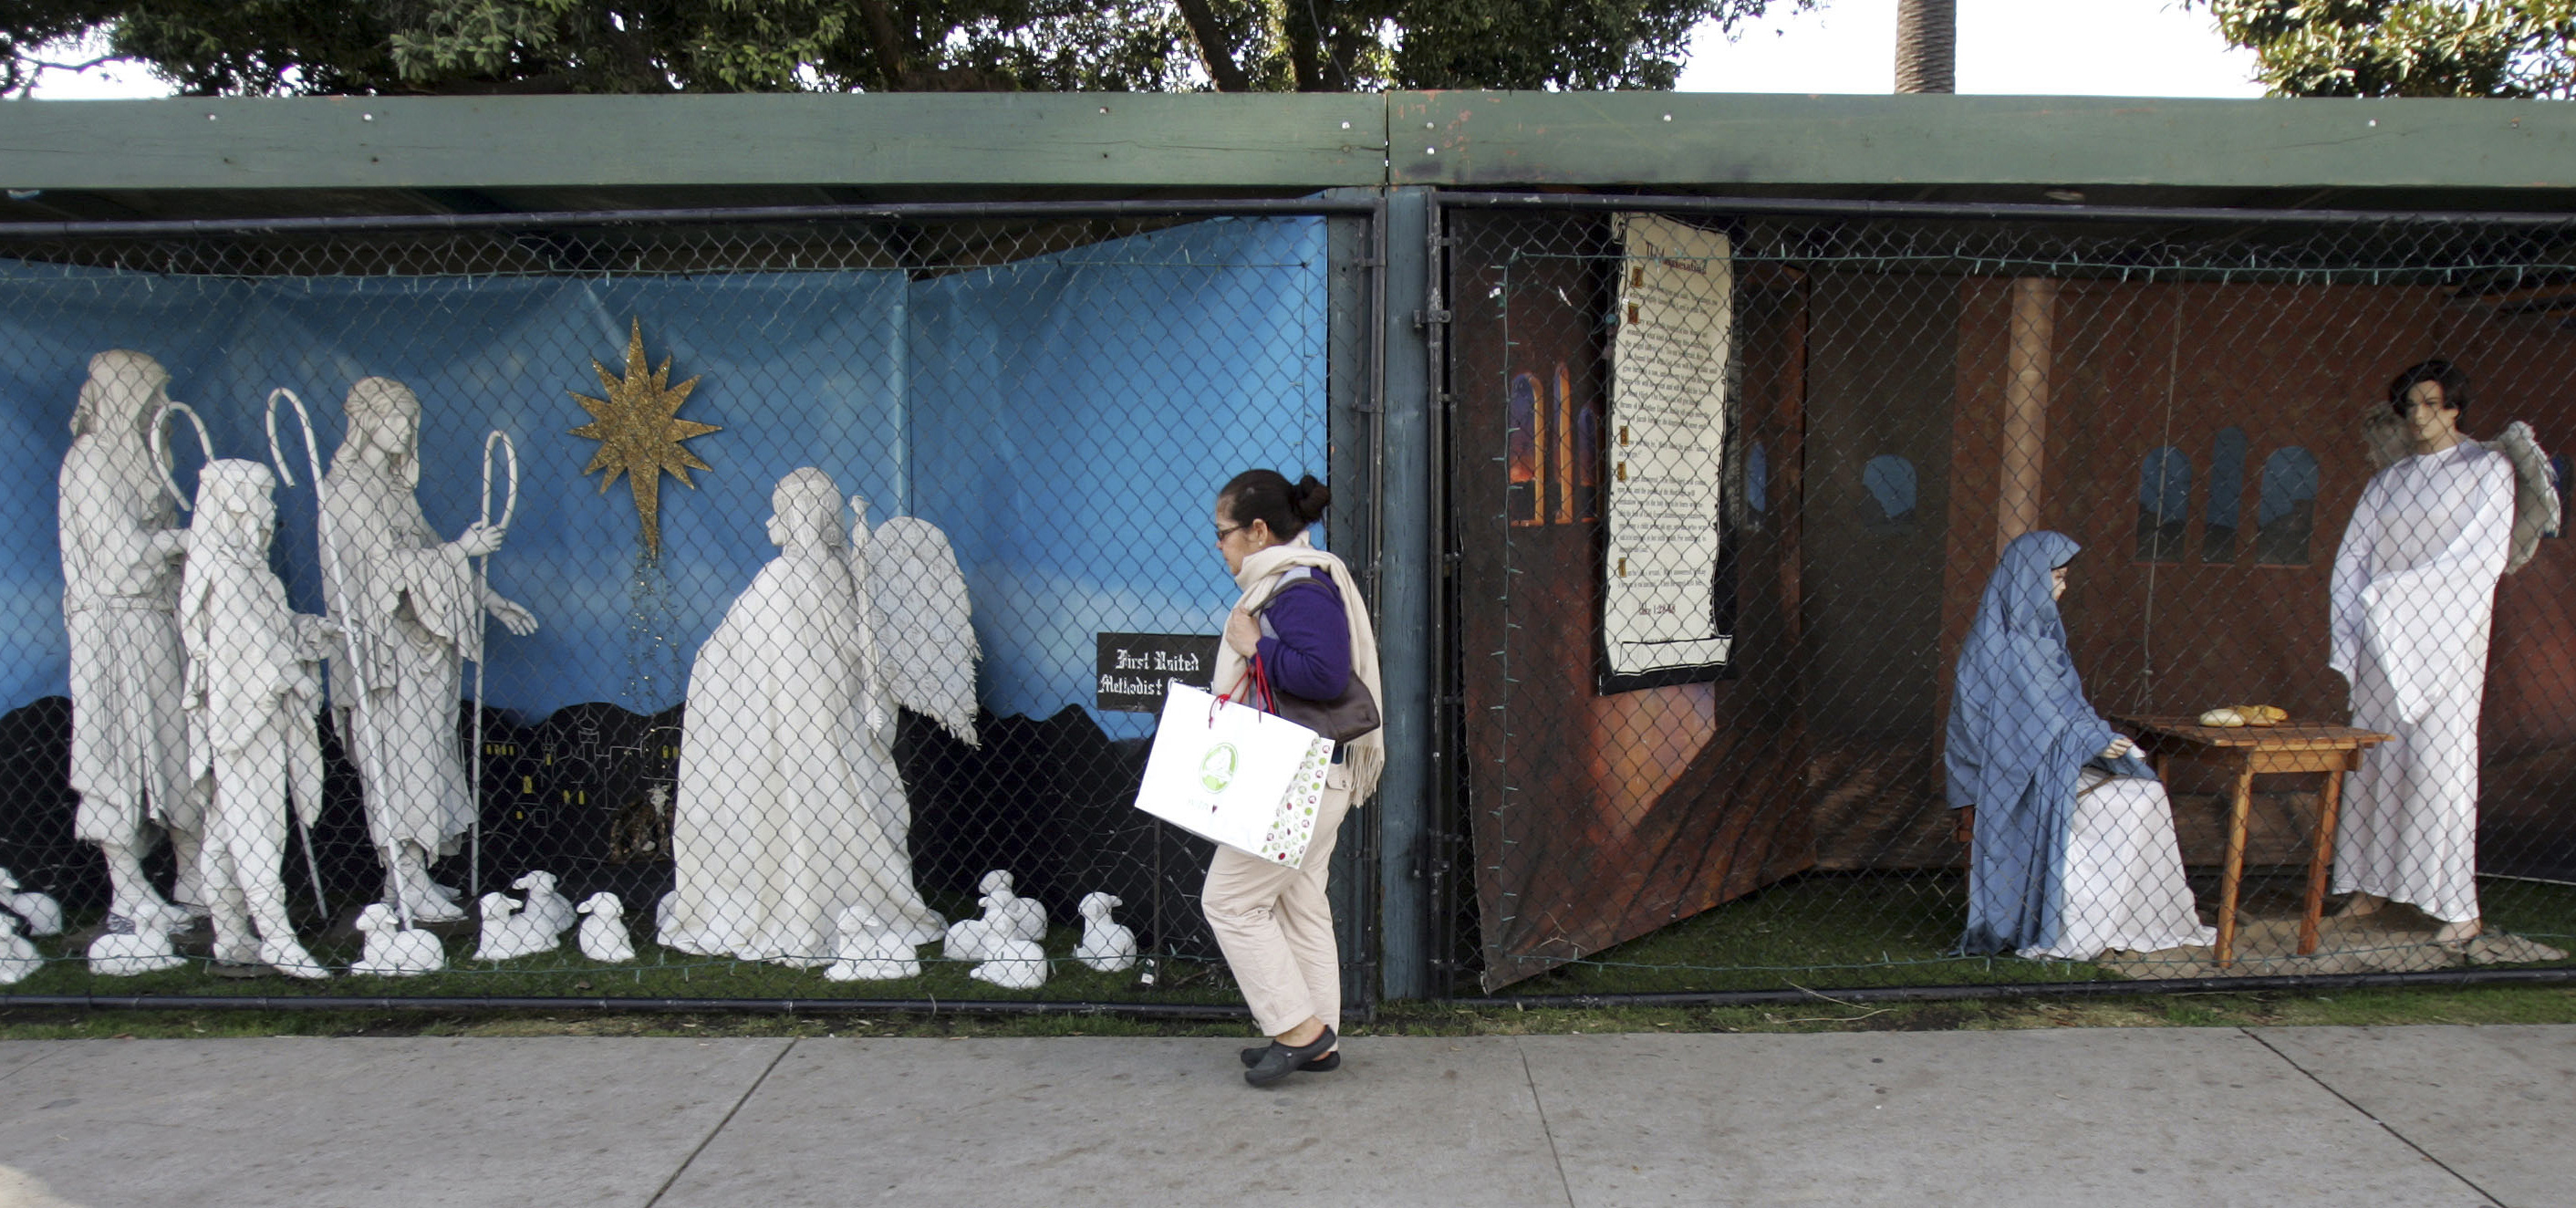 In this Dec. 13, 2011 file photo, a woman walks past a two of the traditional displays showing the Nativity scene along Ocean Avenue at Palisades Park in Santa Monica, Calif. (Ringo H.W. Chiu—AP)